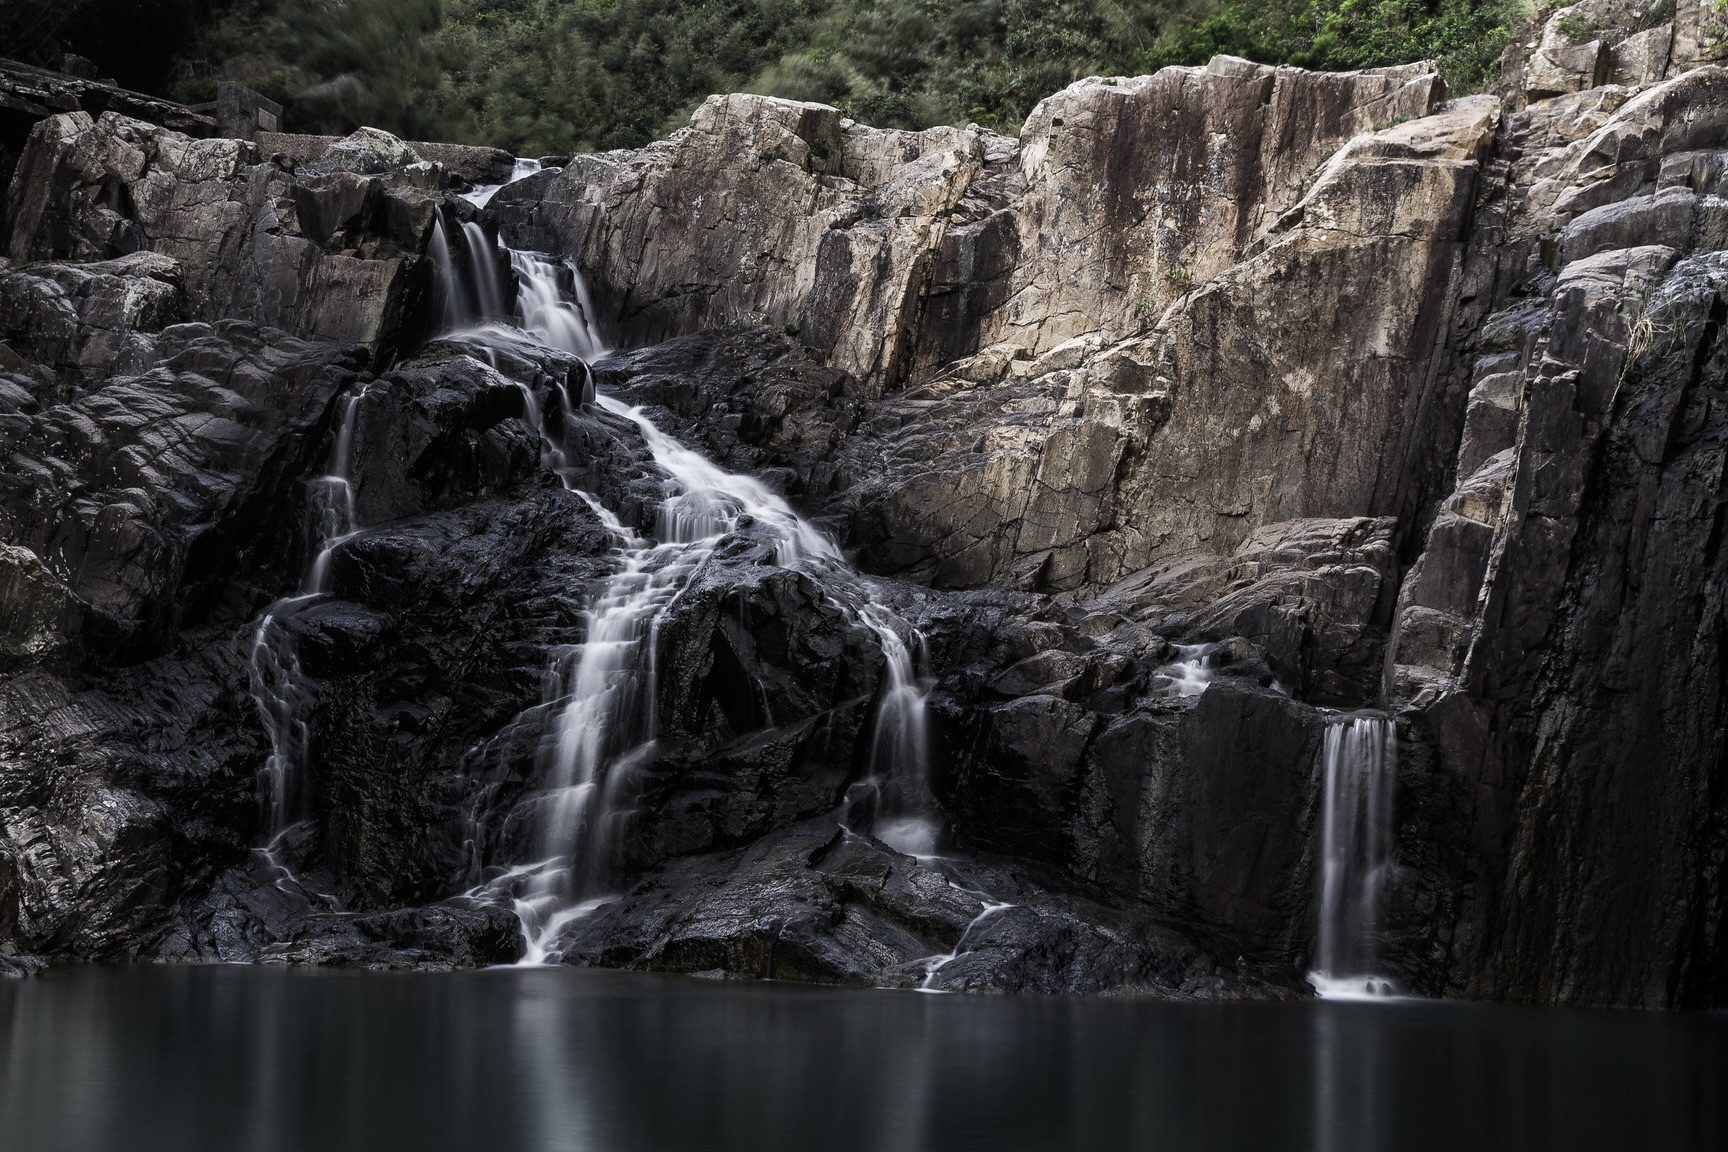 The cascading waterfall of Sheung Luk Stream in Sai Kung East Country Park.